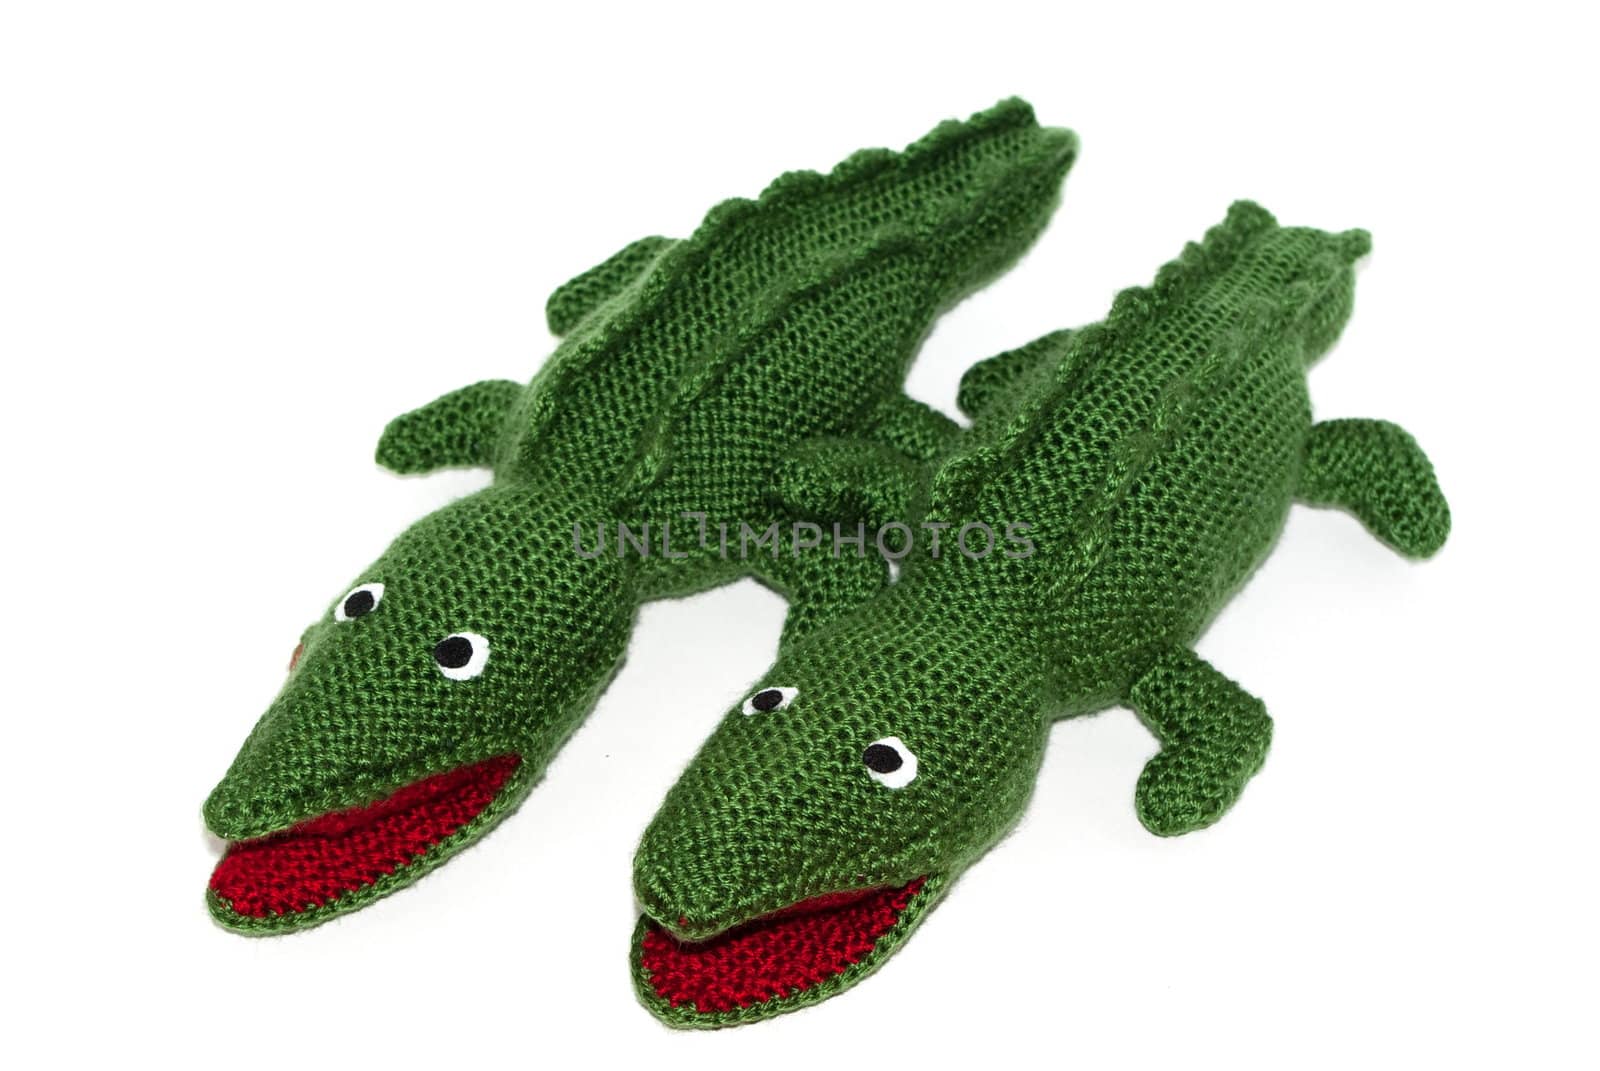 Pair of green crocodiles toys by Vitamin